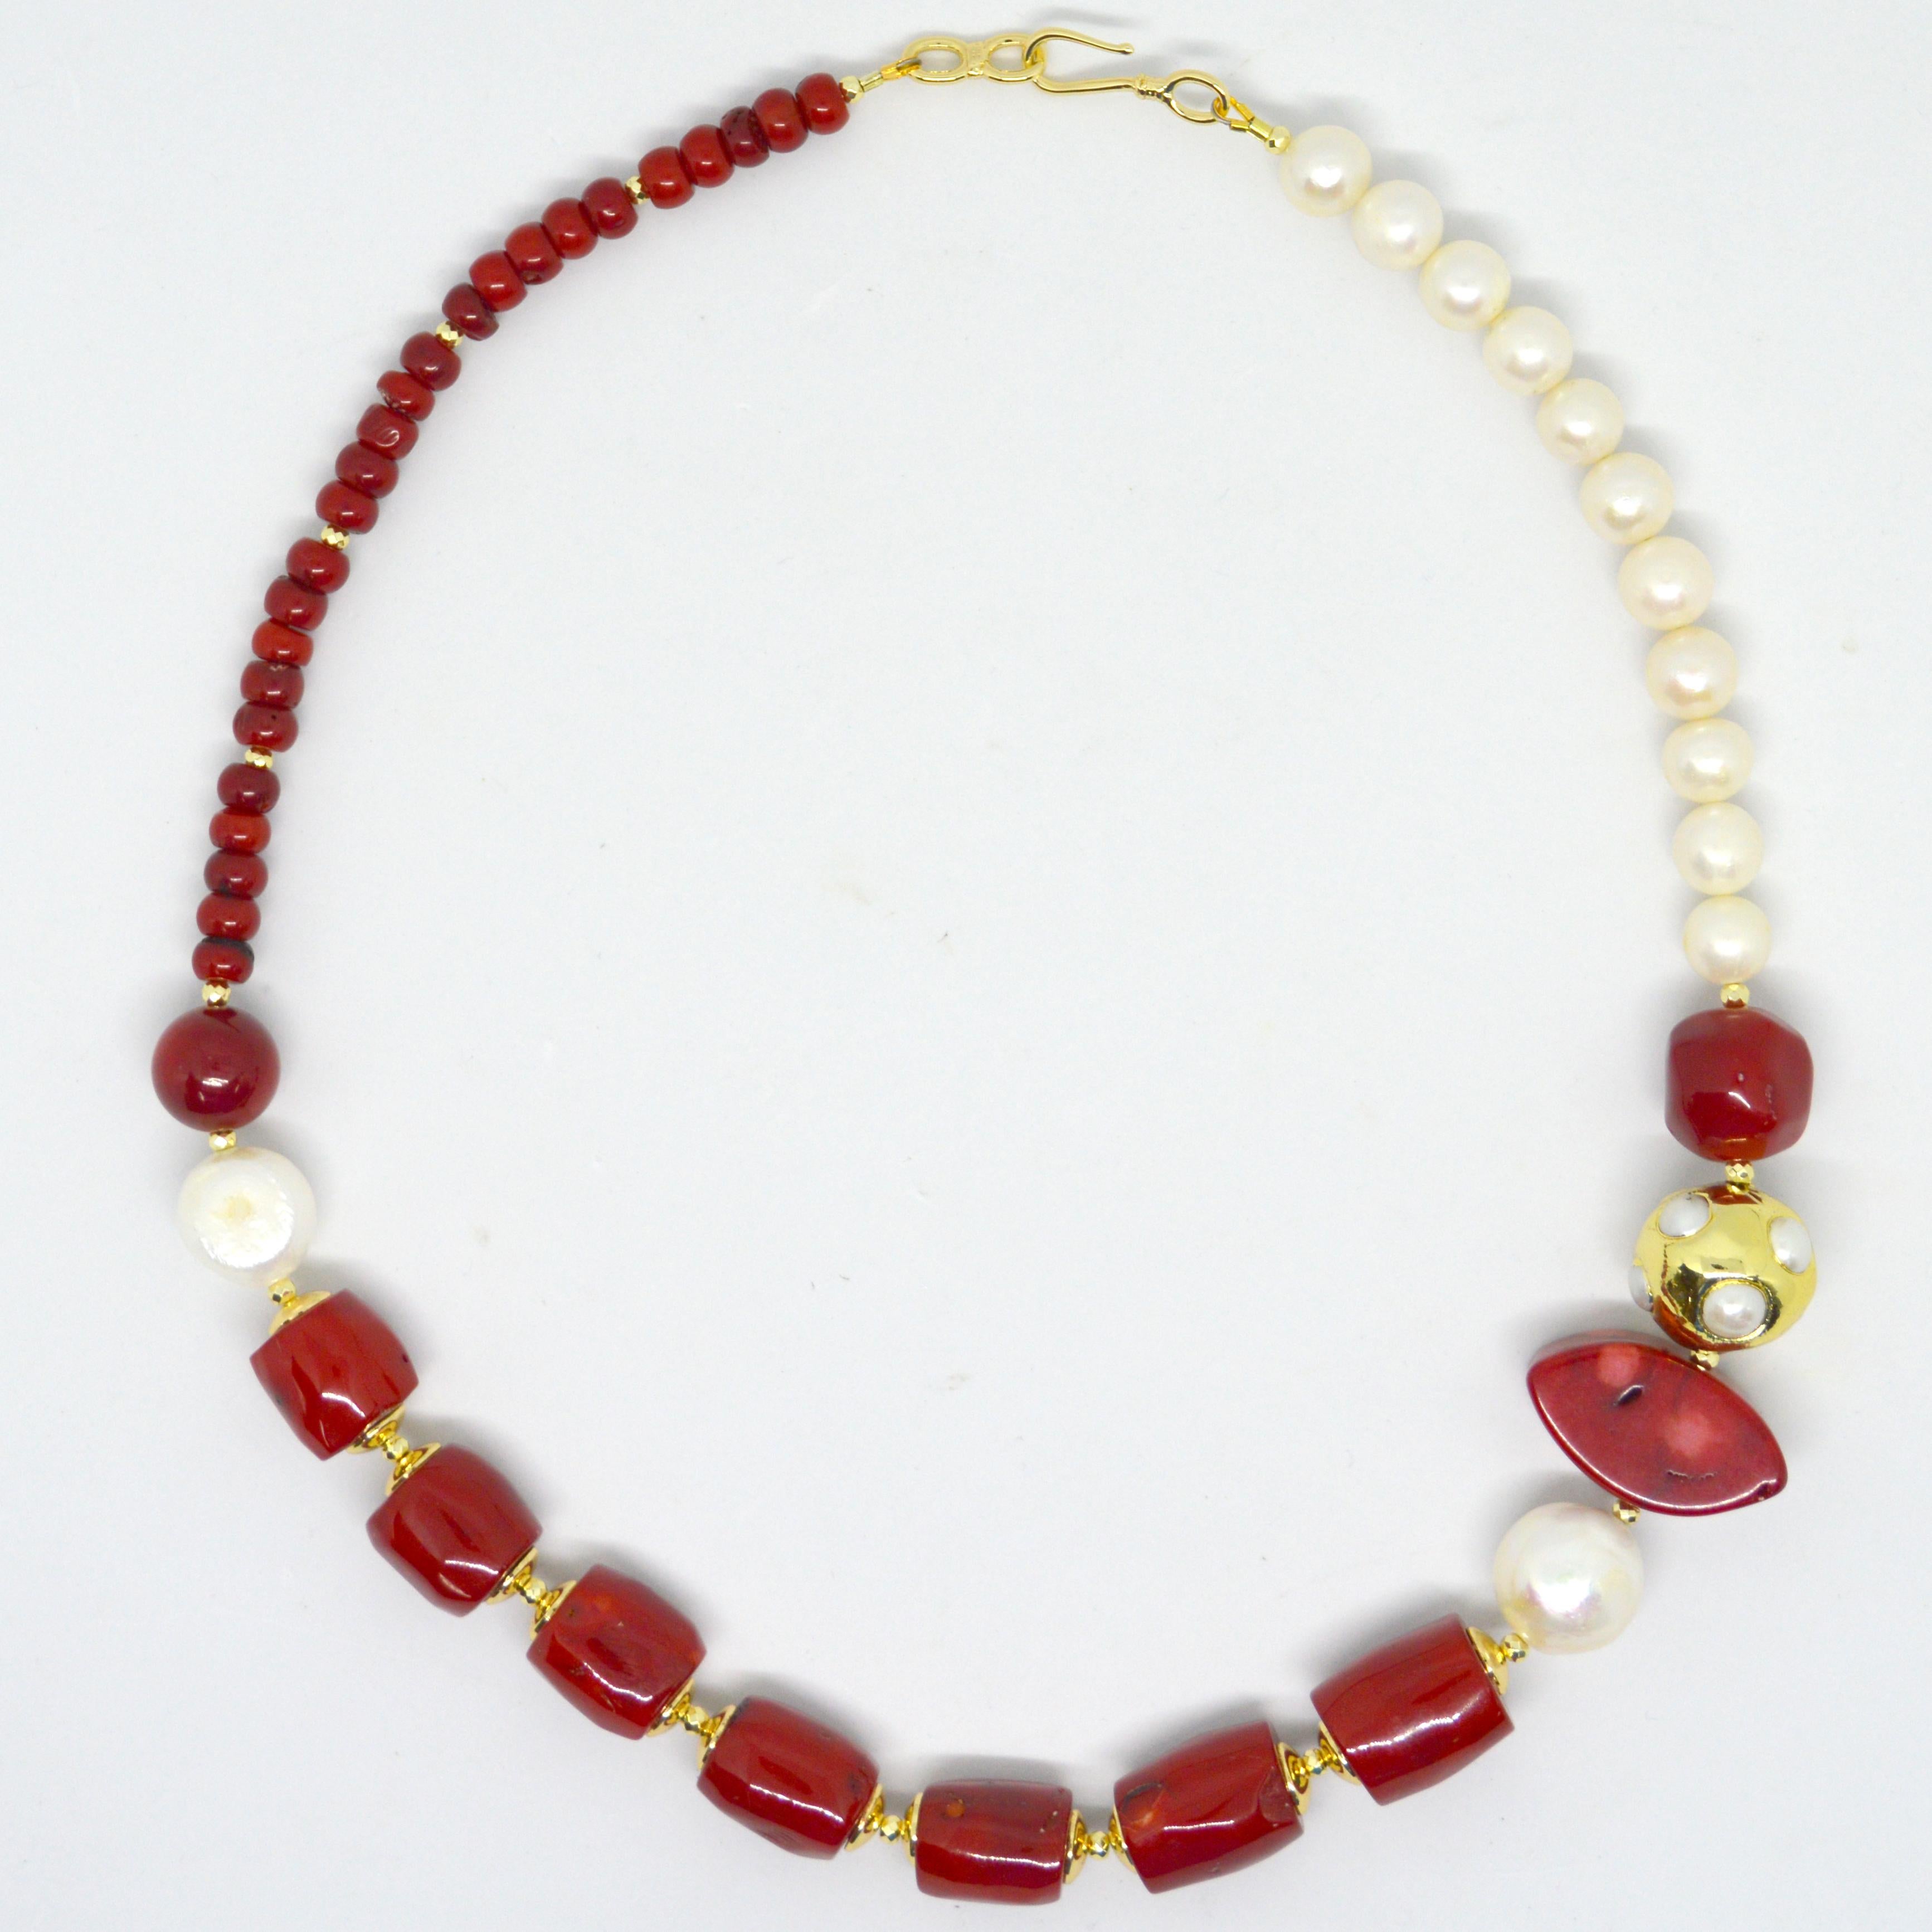 Fit for Summer this statement Red Sea Bamboo and natural Freshwater Pearl Necklace can be worn day or night.
necklace features a 22mm Gold plate Brass fresh water Pearl set bead
2 large Baroque Fresh Water Pearls 16mm and 18mm
Red Sea Bamboo up to